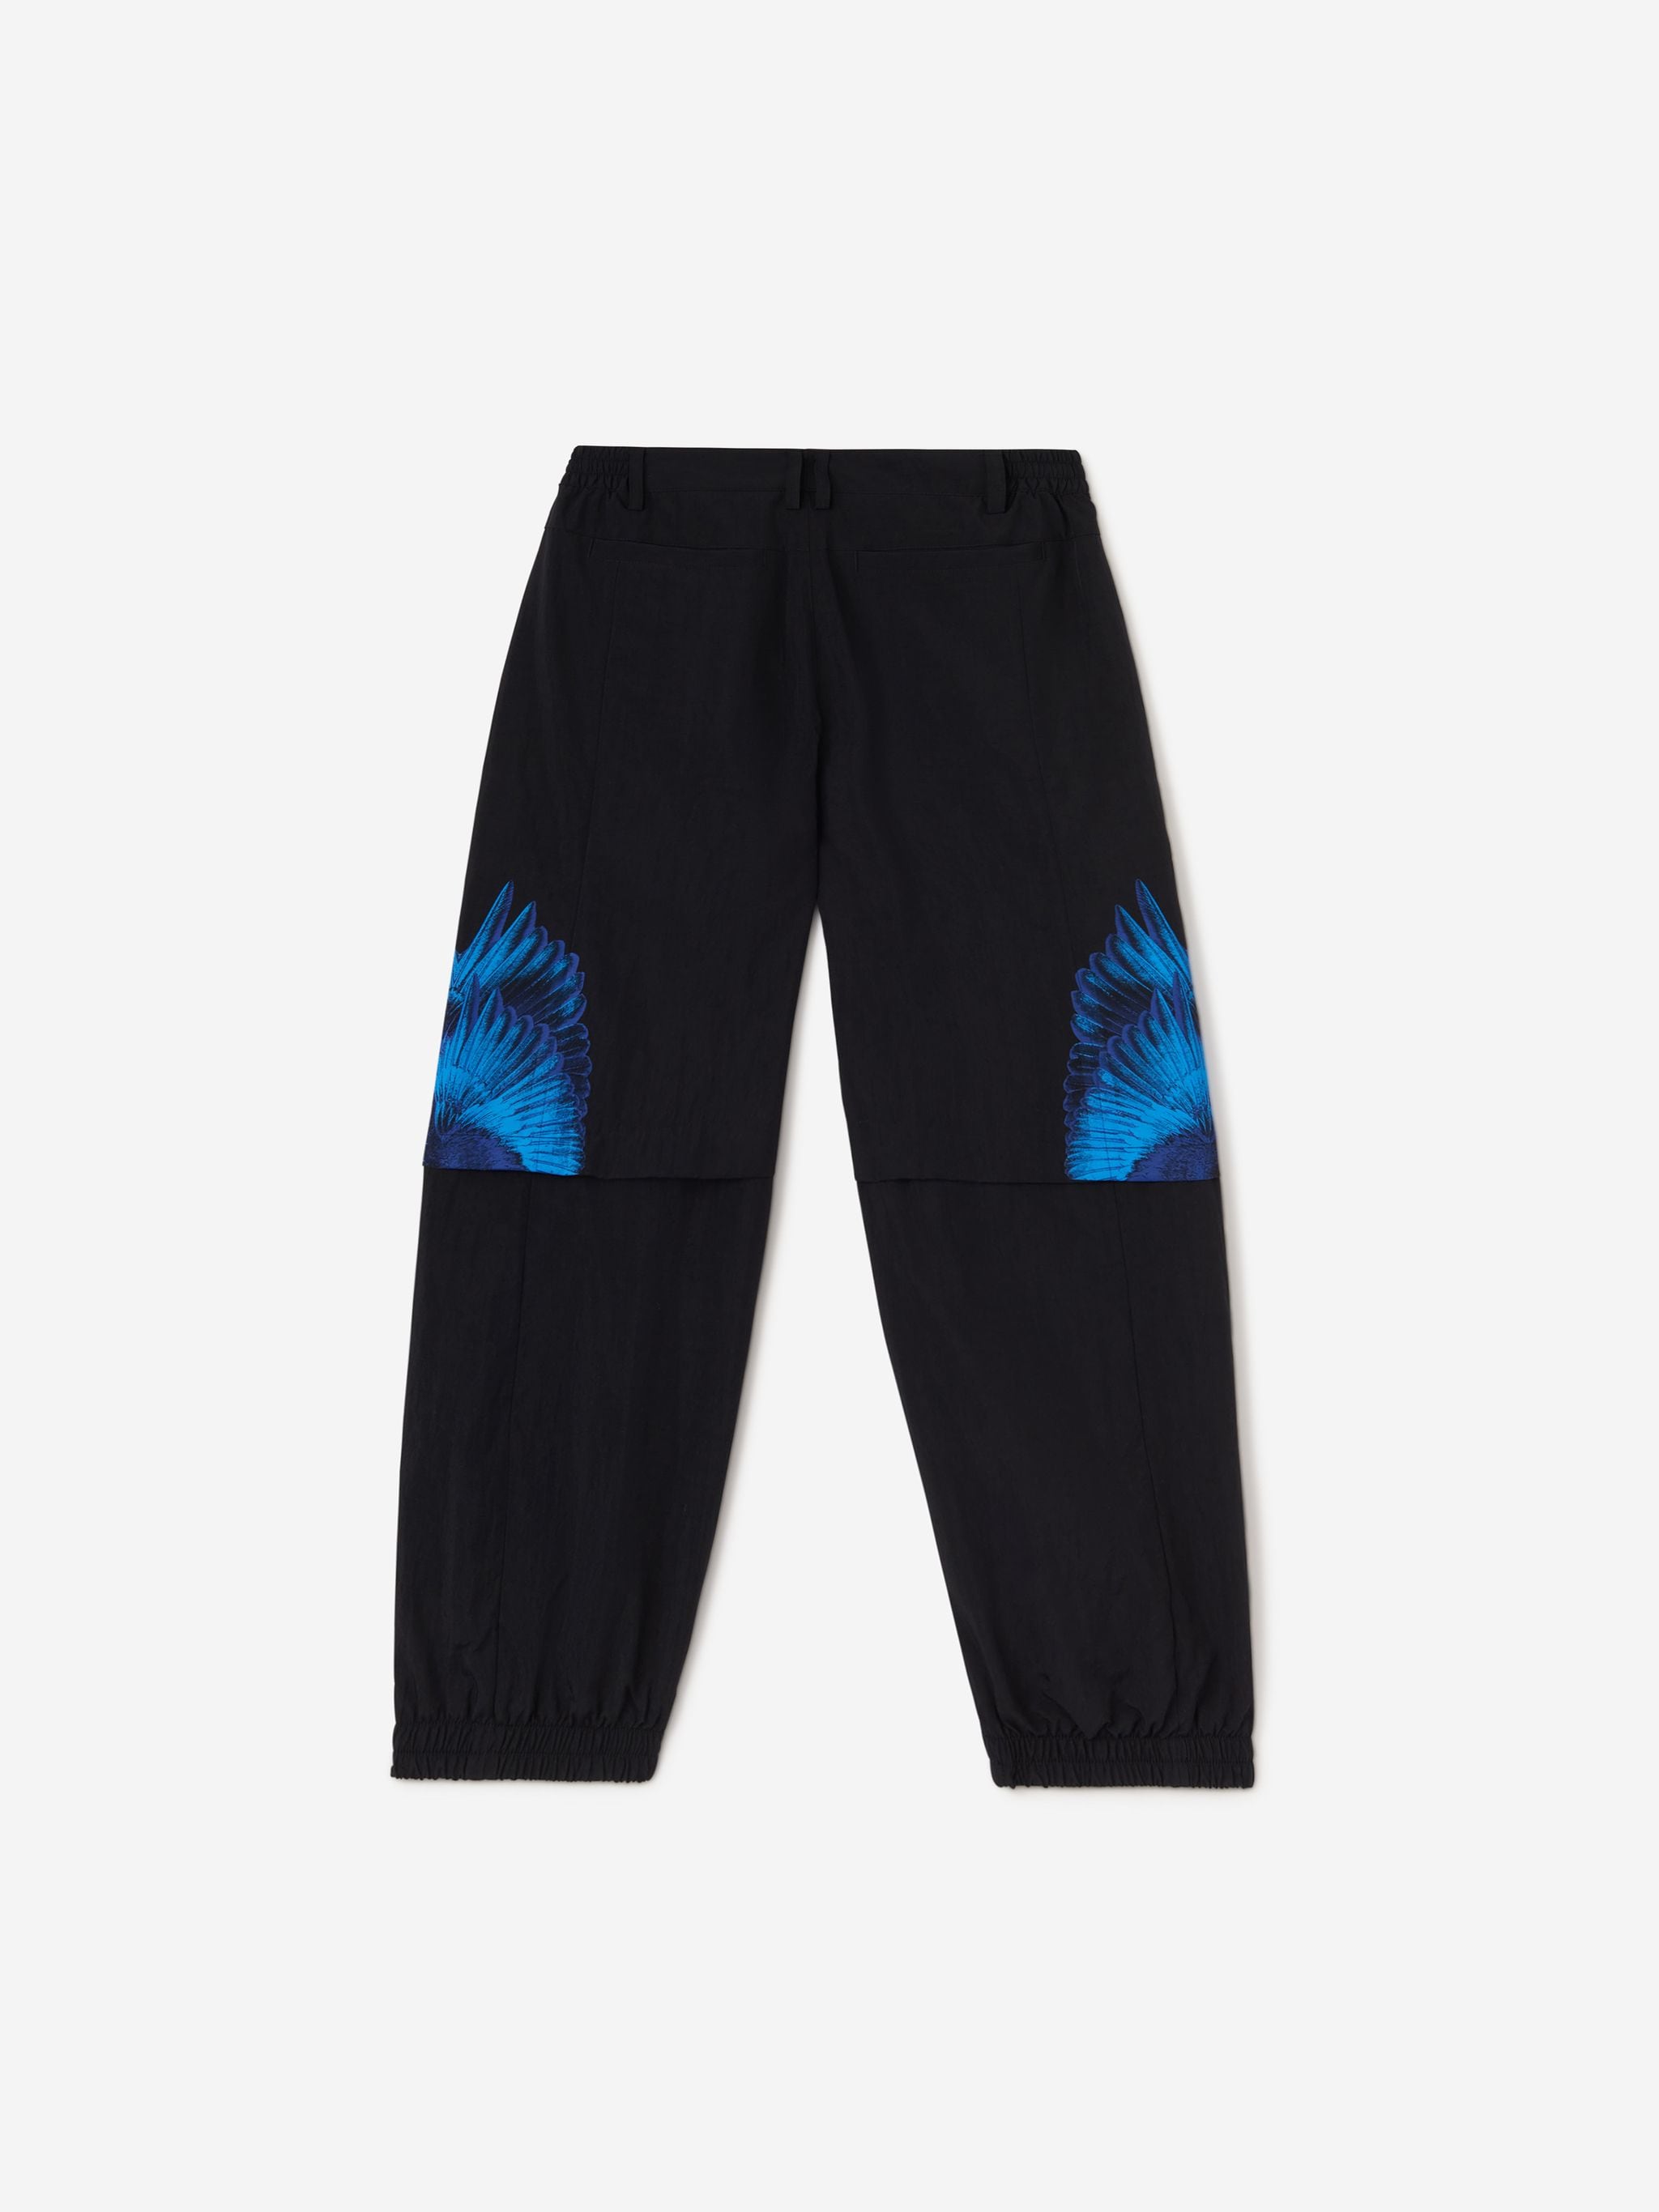 Black/blue x FILA feather print trousers from Marcelo Burlon County of Milan featuring feather print, logo patch to the side, slip pockets to the sides, elasticated waistband, front button and zip fastening and elasticated ankles.